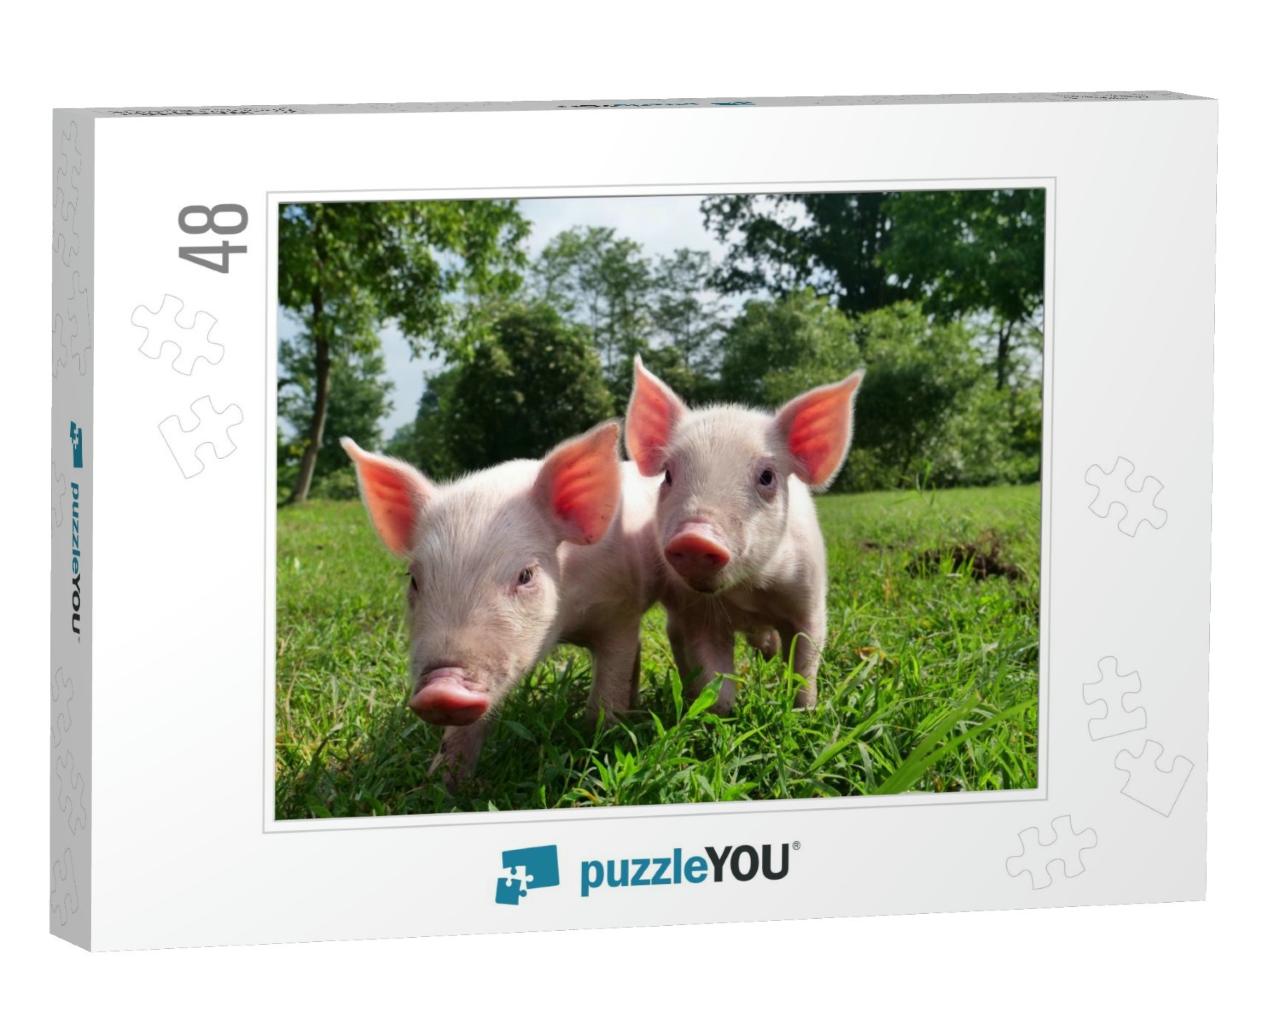 Pig Cute Newborn Standing on a Grass Lawn. Concept of Bio... Jigsaw Puzzle with 48 pieces